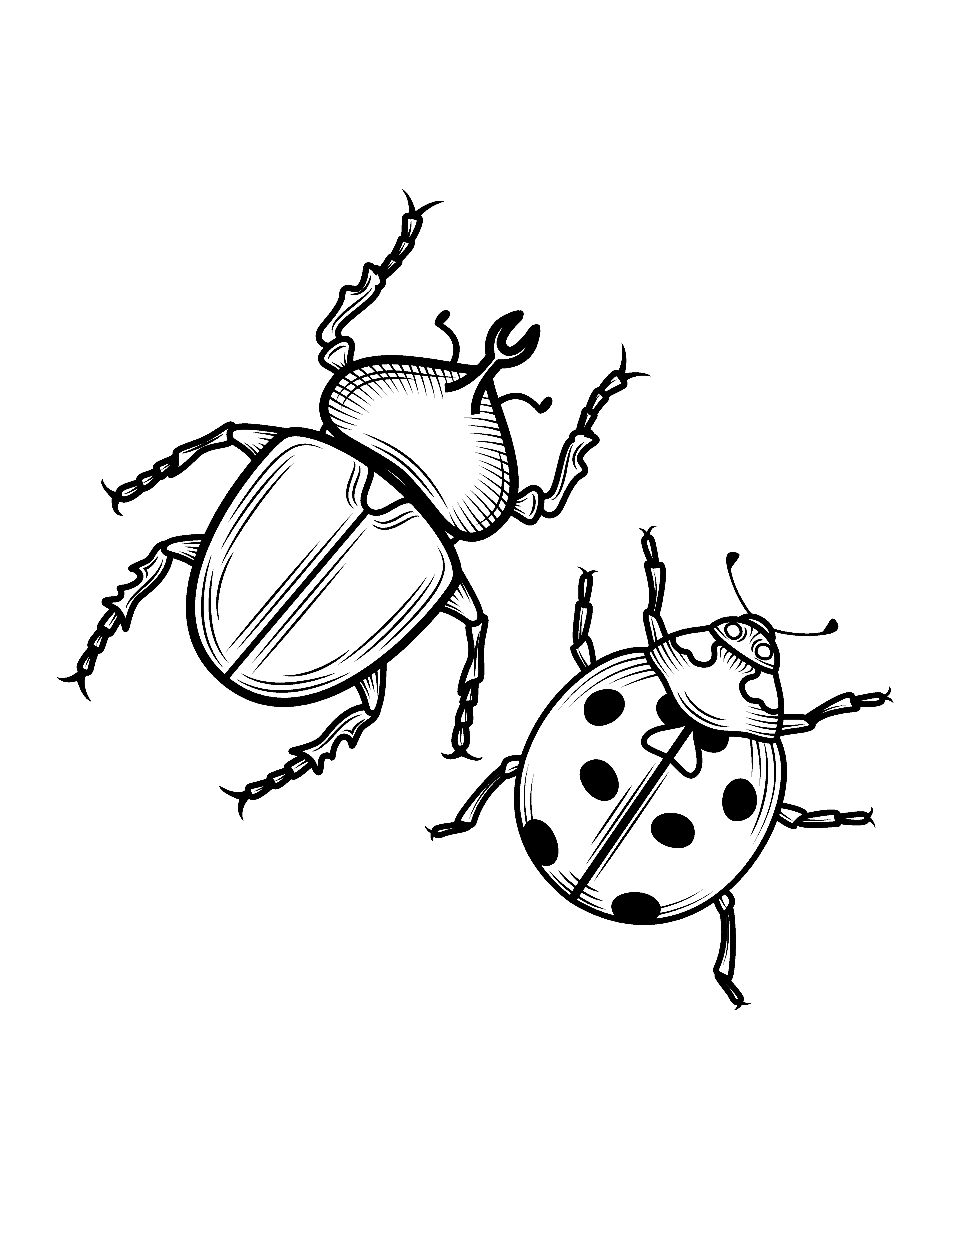 Beetle and Ladybug Side by Coloring Page - A ladybug and a beetle standing side by side.